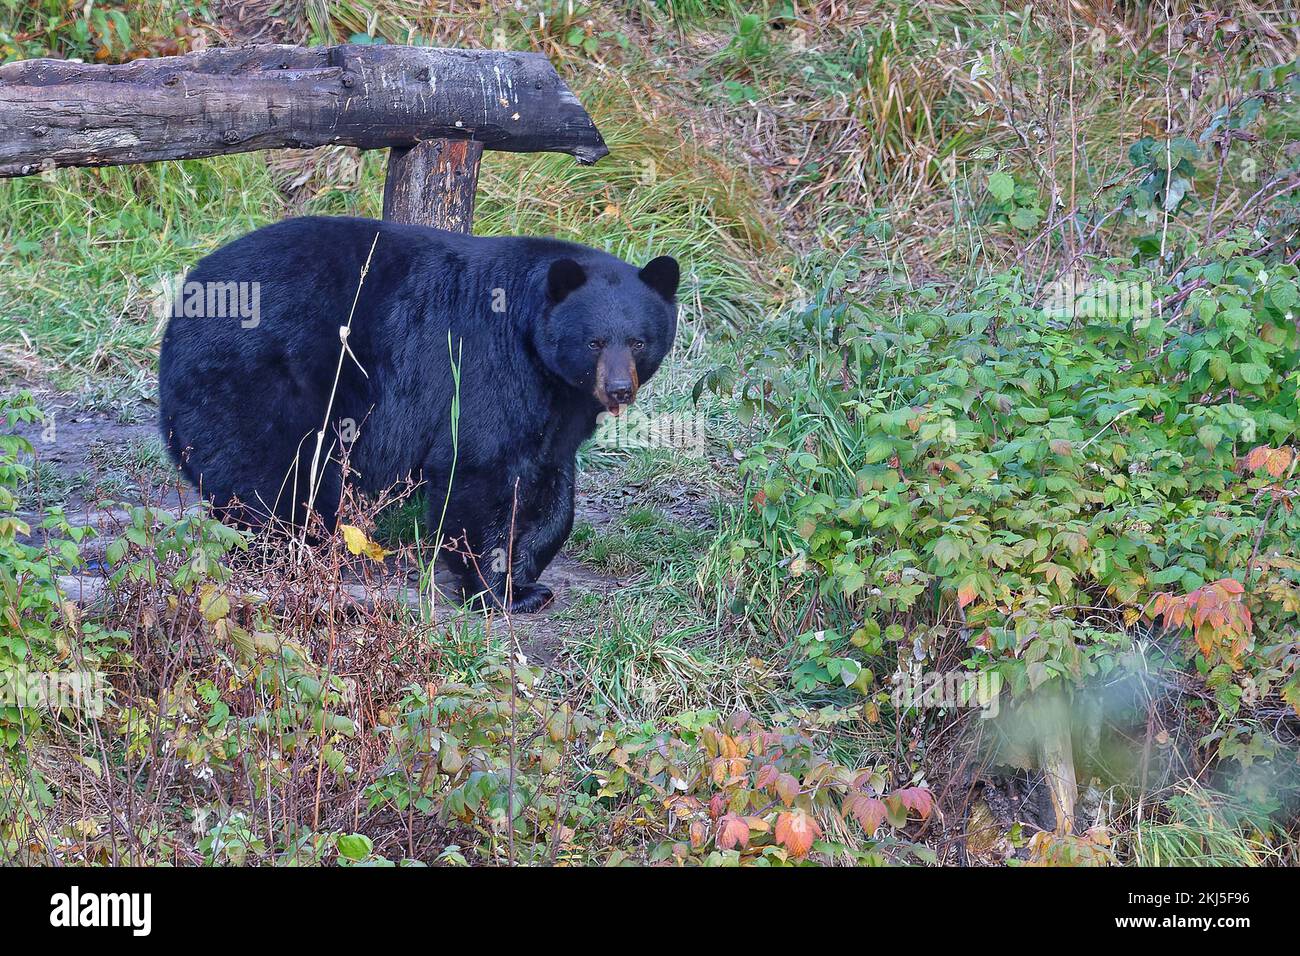 An american black bear (Ursus americanus), also called a baribal, in the forest of Quebec, Canada Stock Photo